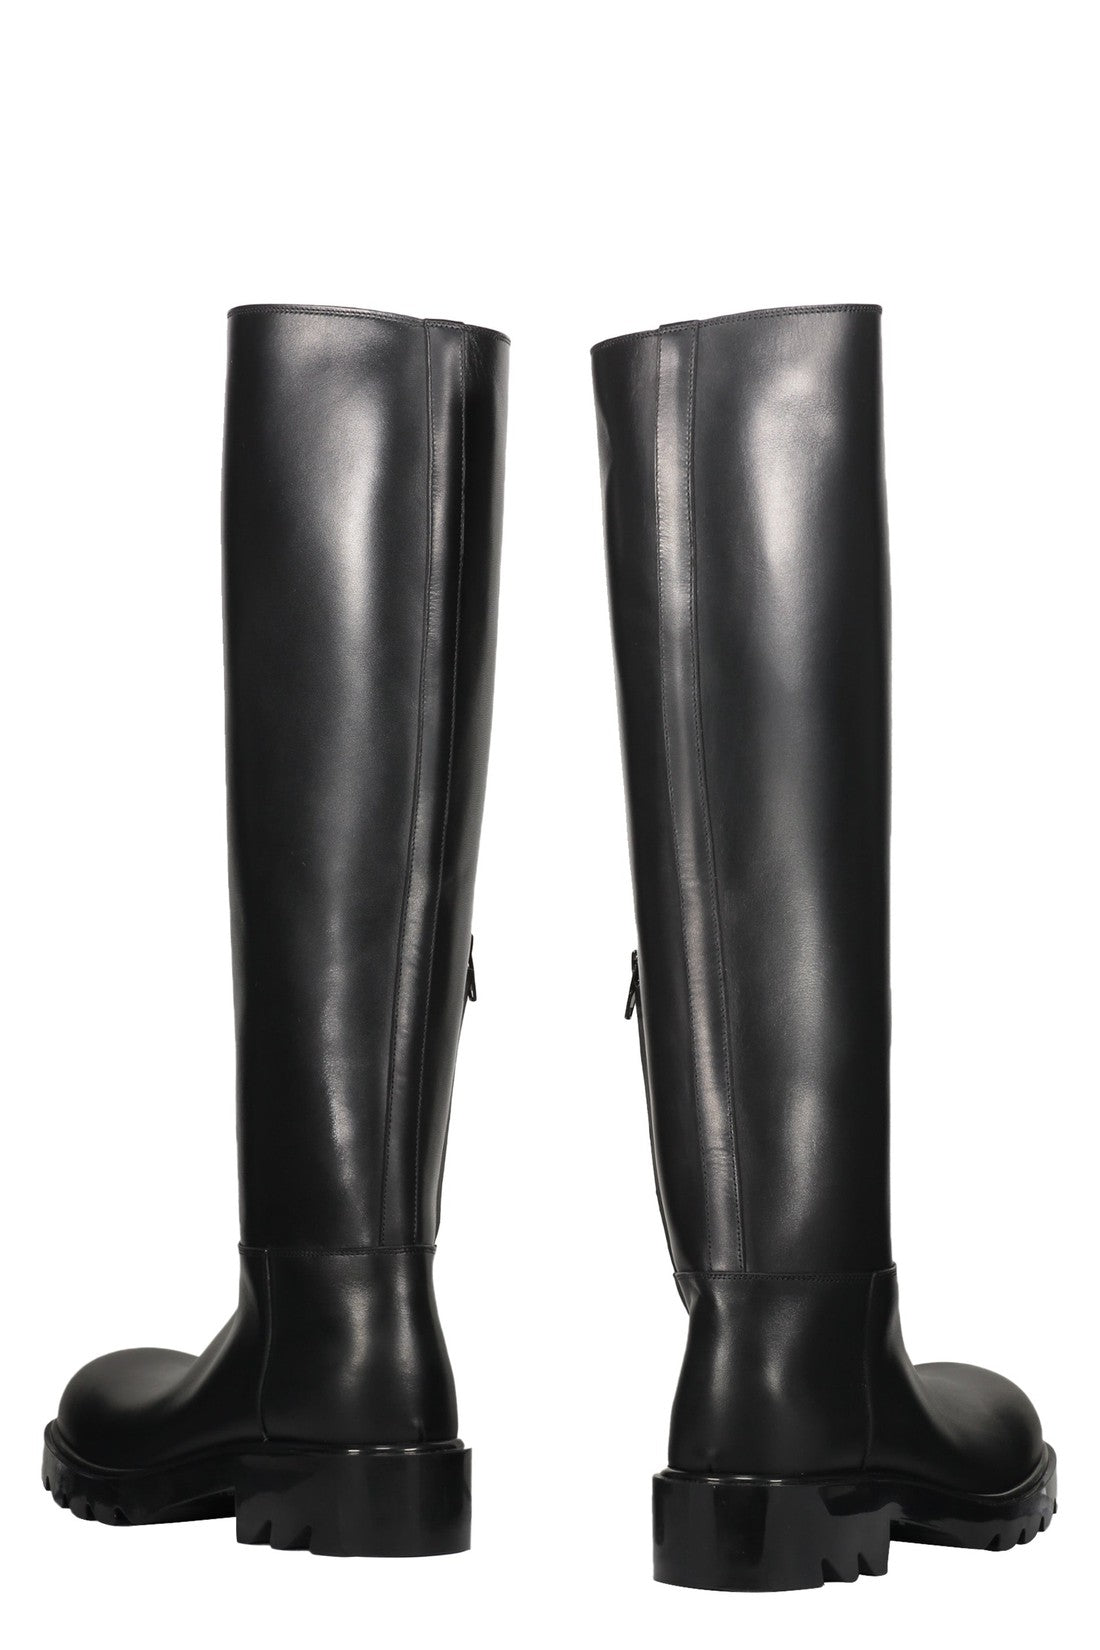 Strut leather boots